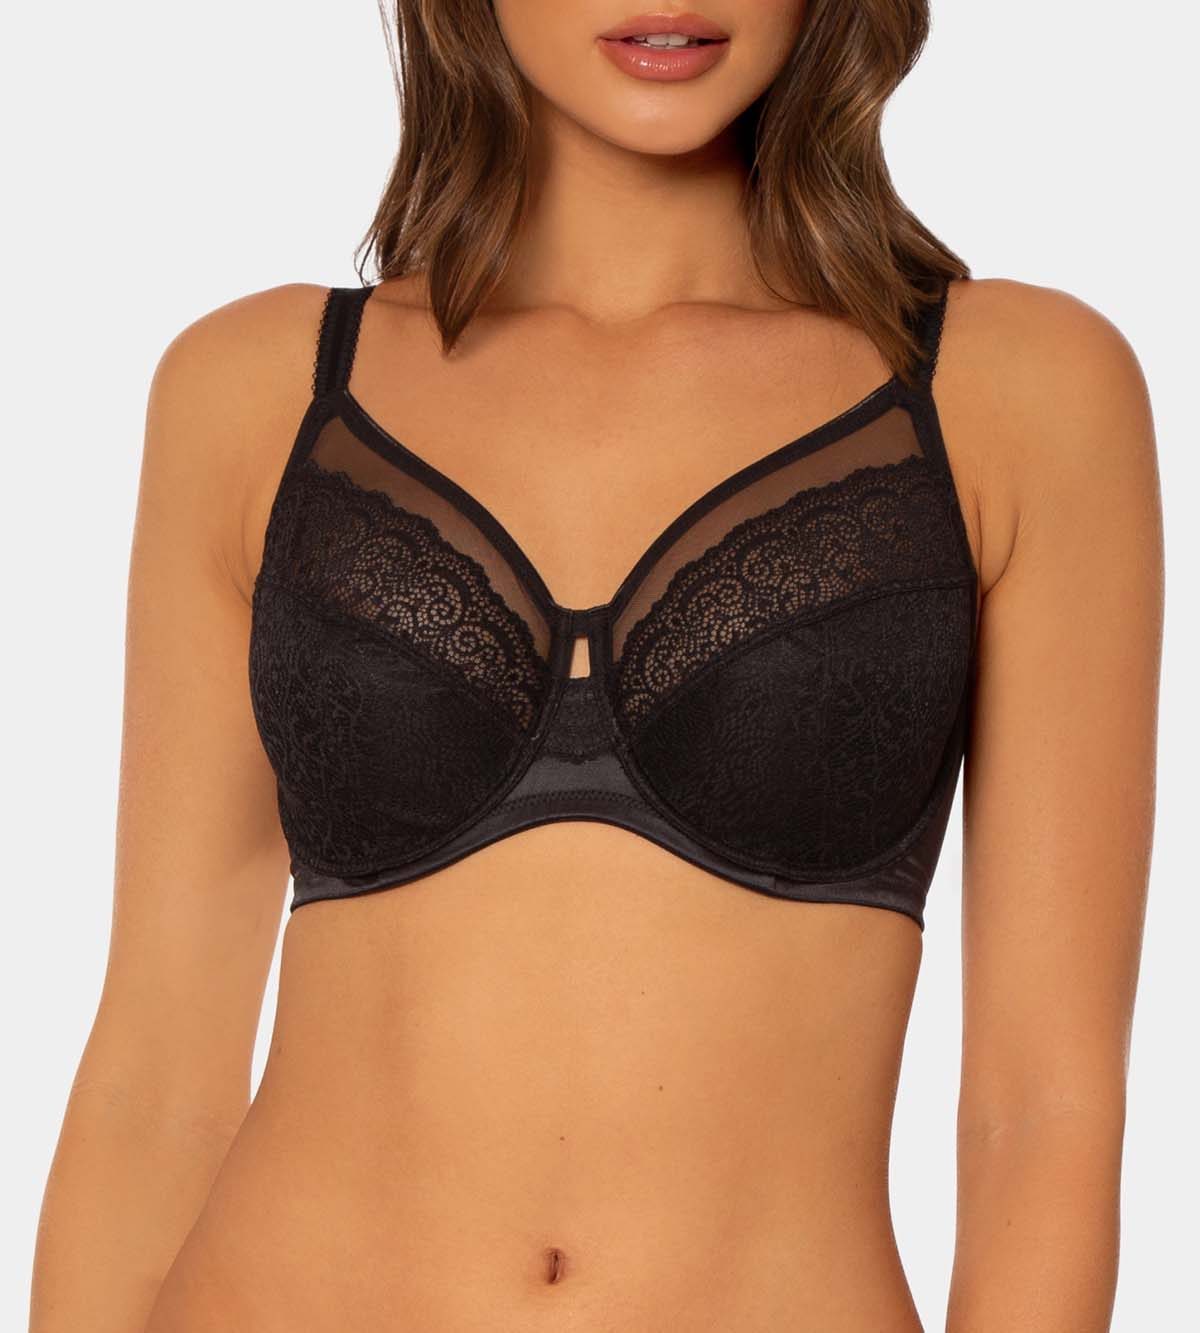 Triumph Sheer Wired 10203155 - Underwire Bra Black / 12C  Available at Illusions Lingerie